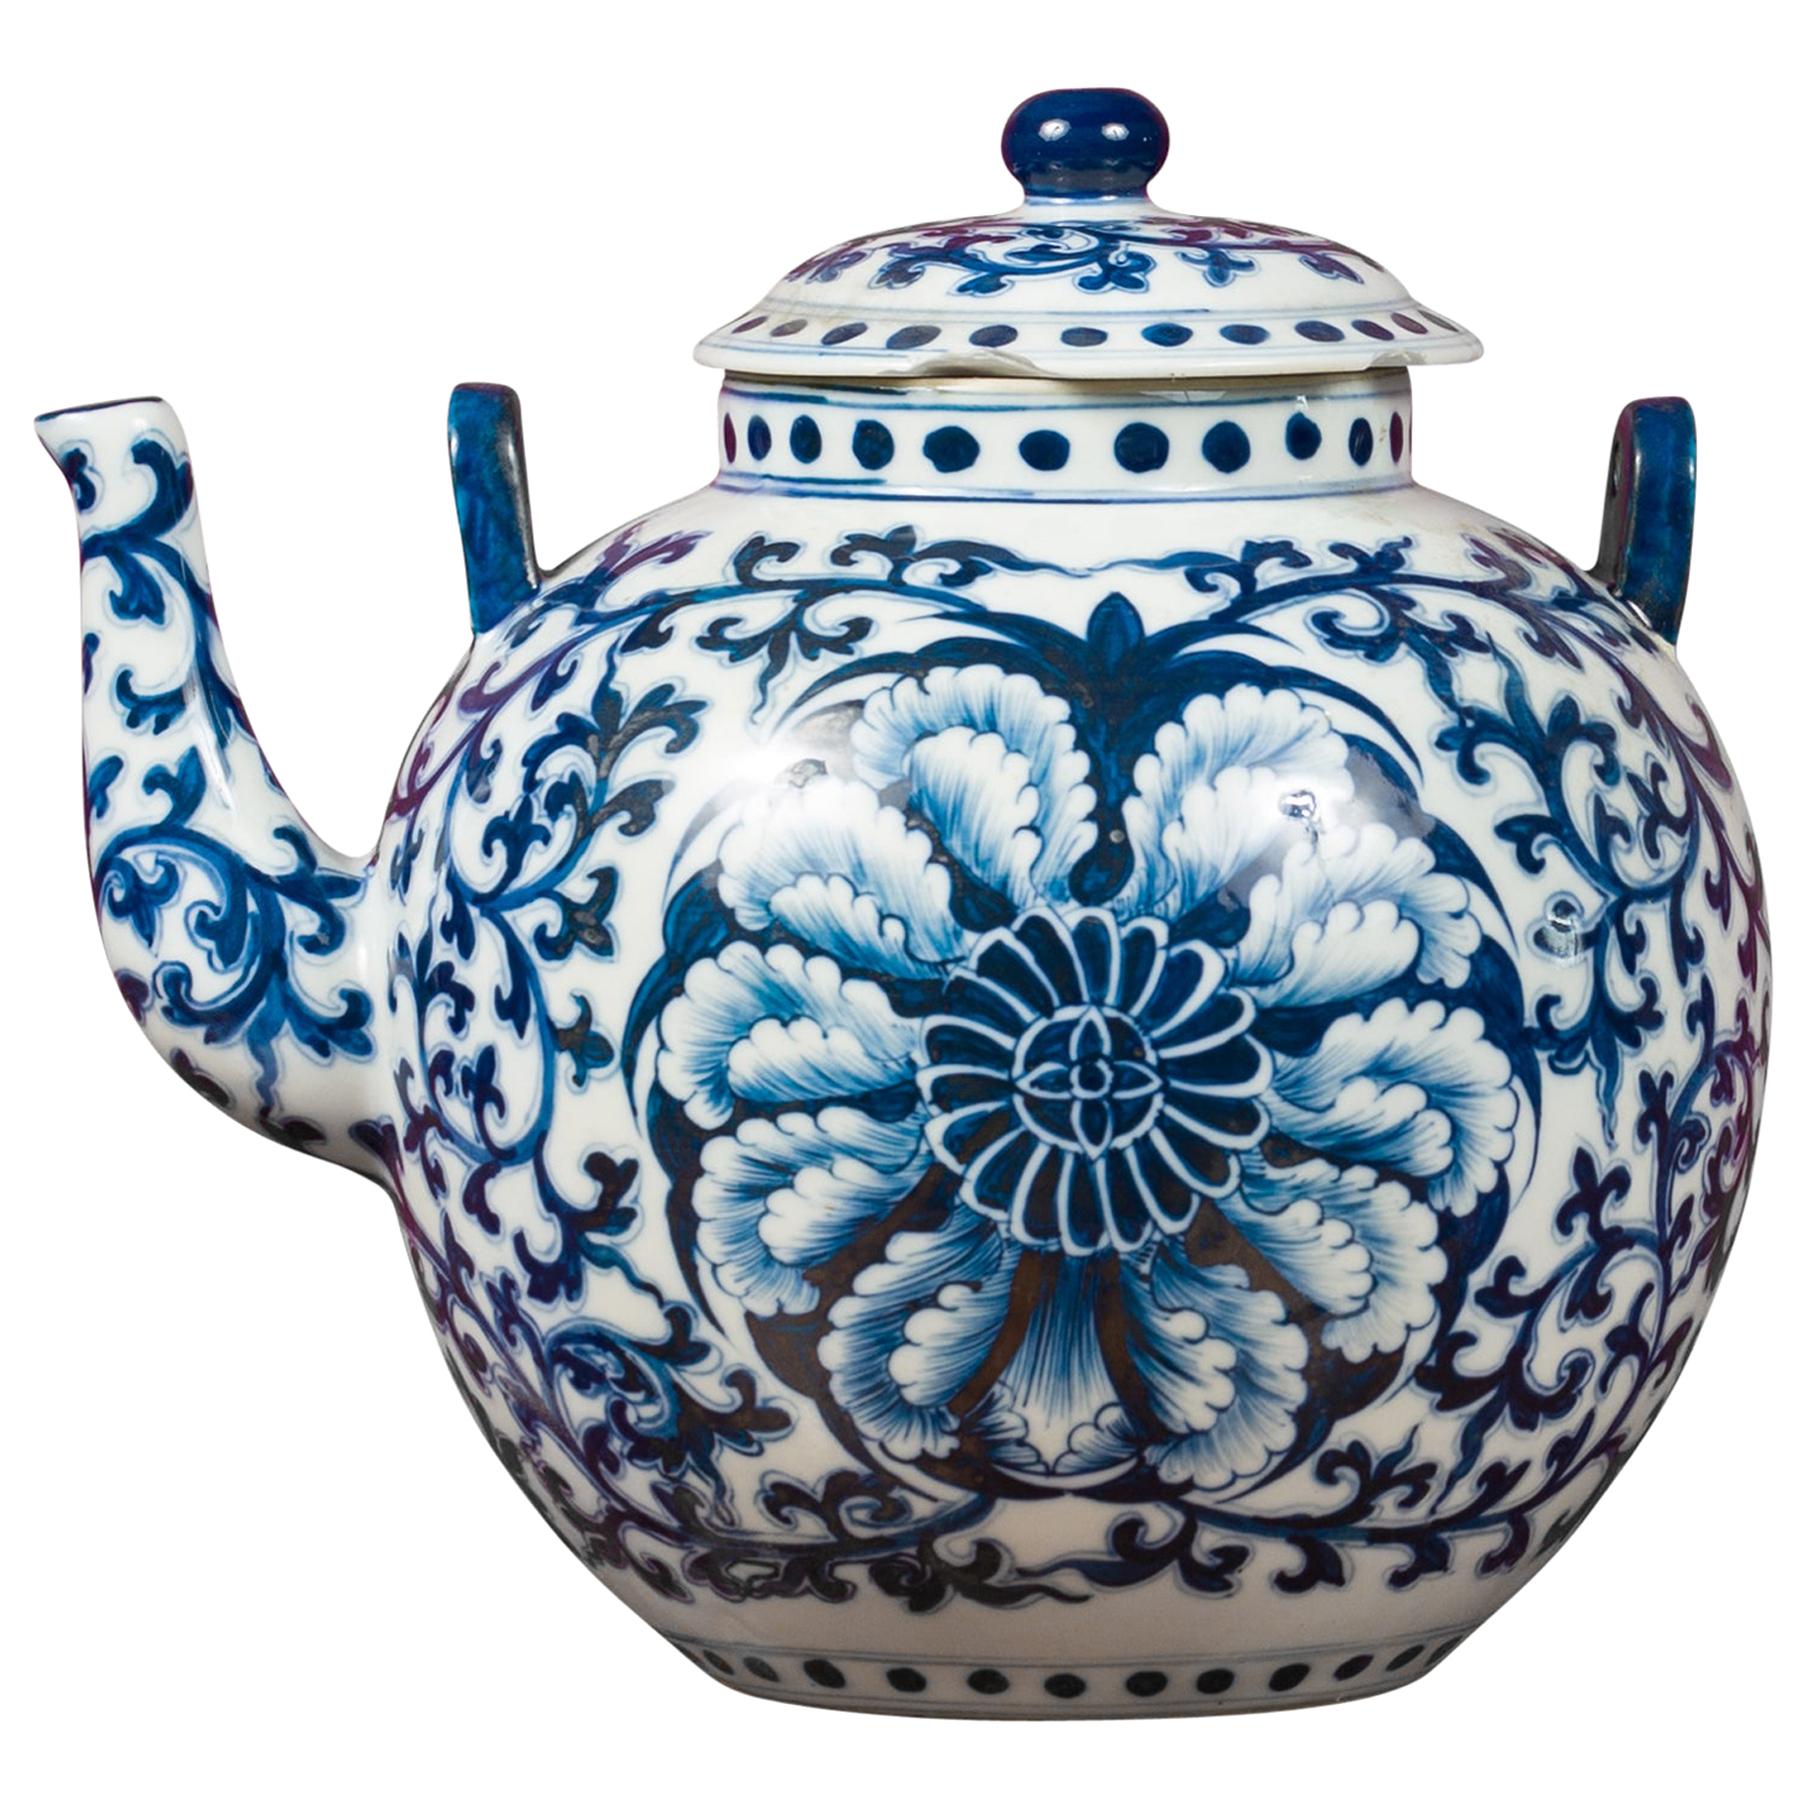 Chinese Vintage Blue and White Porcelain Teapot with Scrolling Foliage Decor